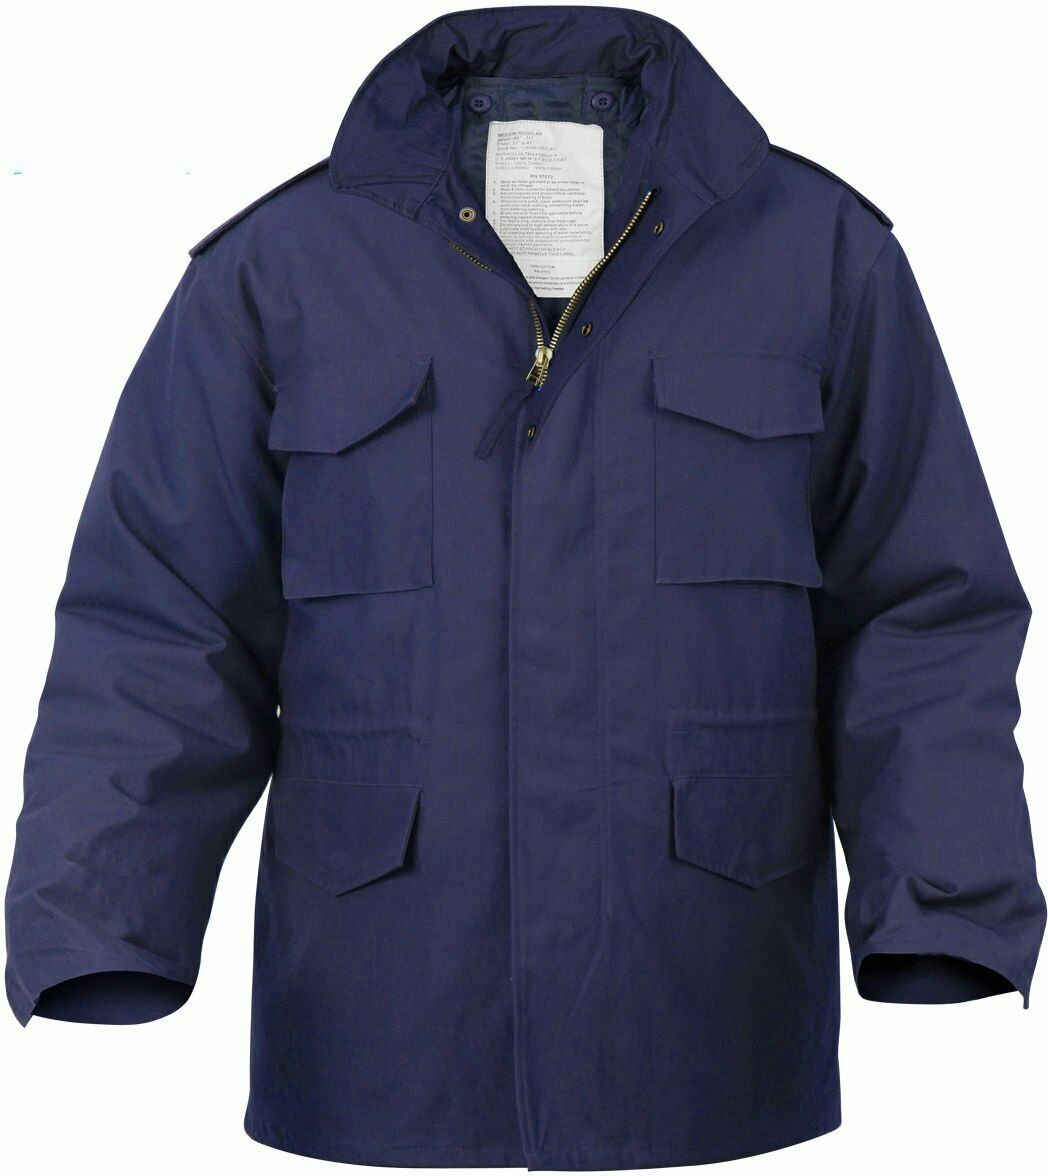 Navy Blue Military M-65 Field Coat Army M65 Jacket with Liner - Men's ...